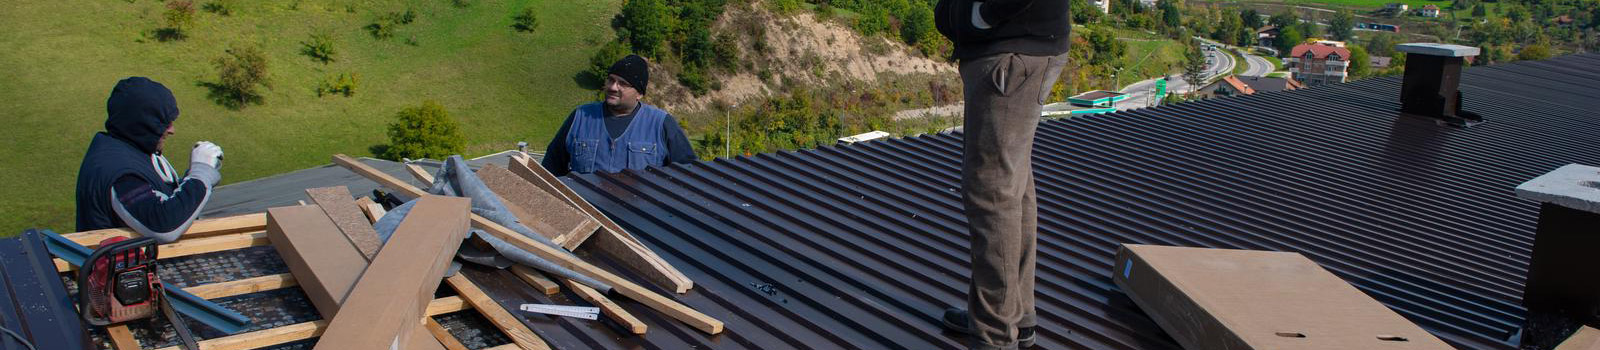 Boise commercial roofing services for office building and warehouses in Idaho.